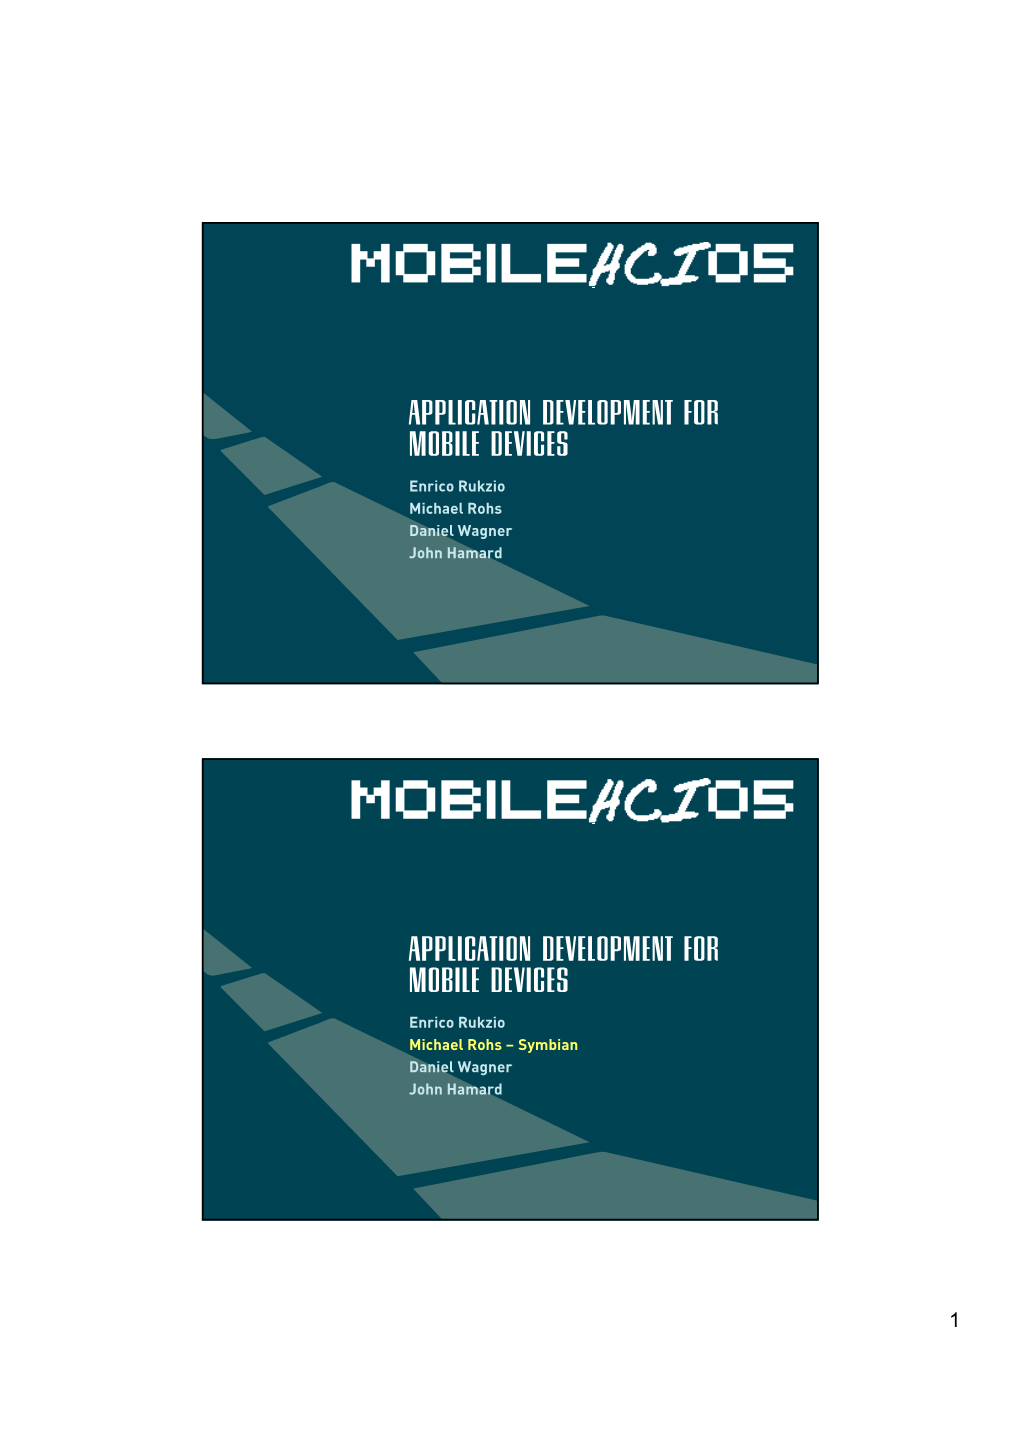 Application Development for Mobile Devices